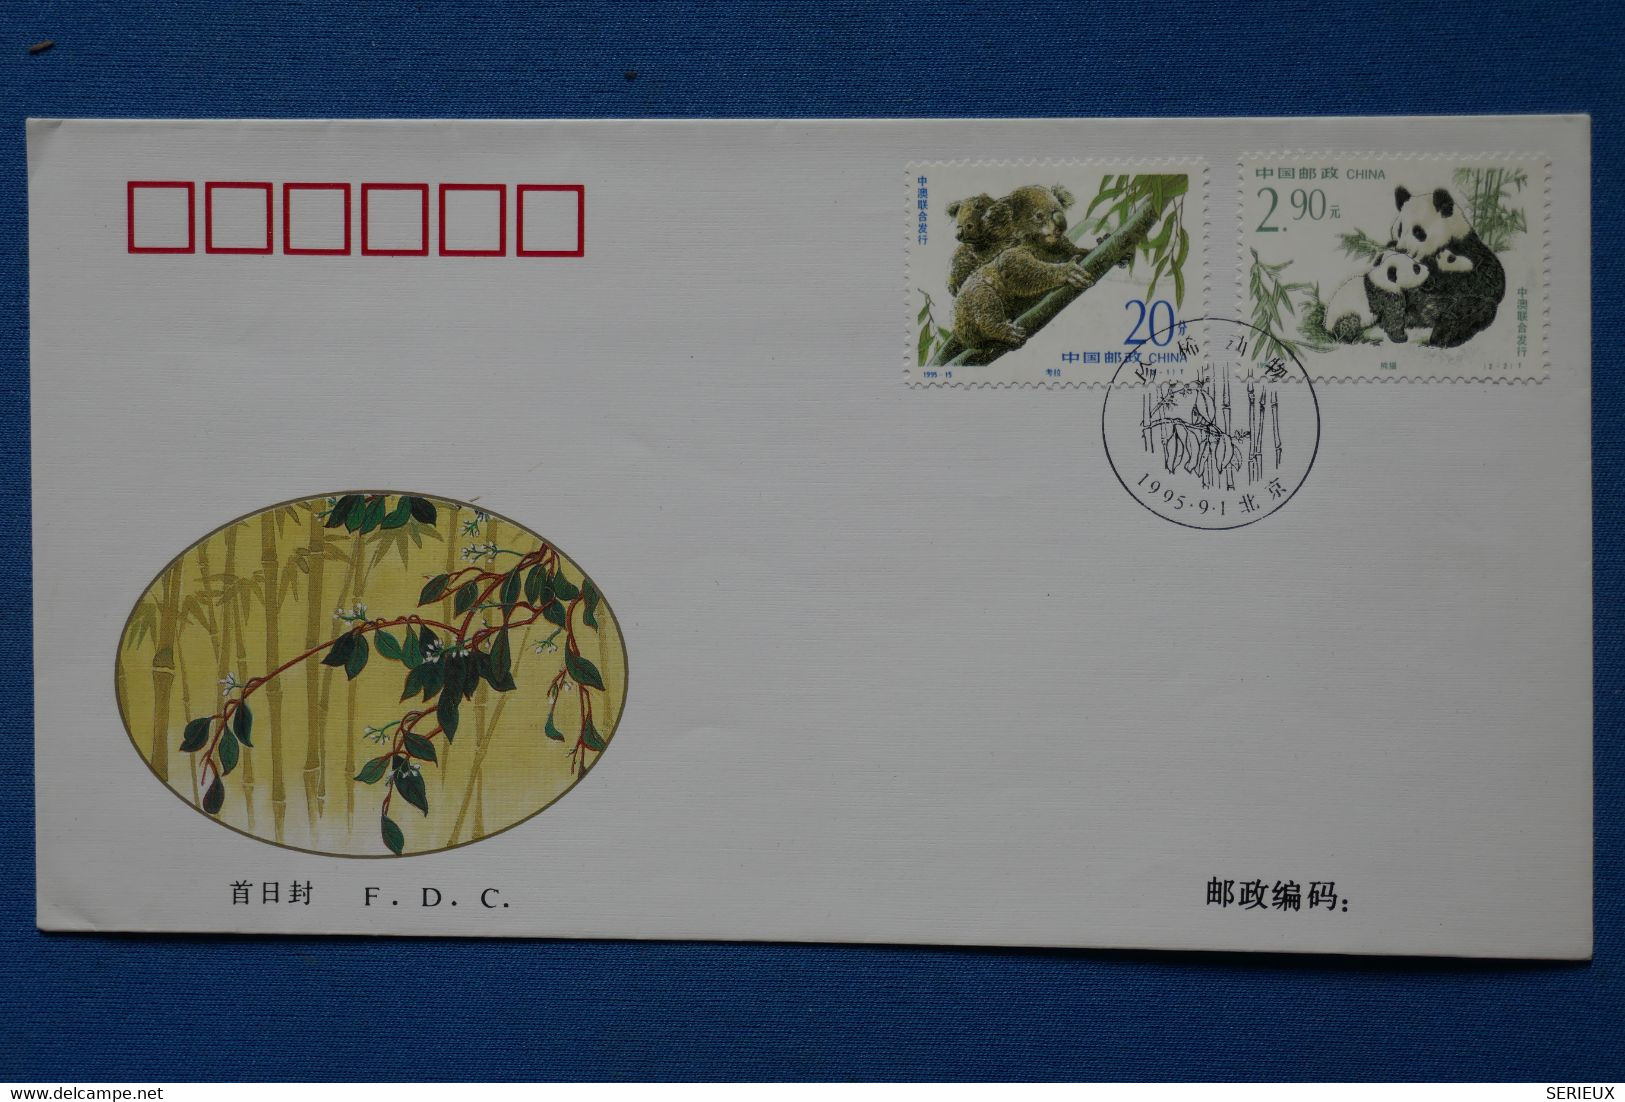 W9 CHINA  BELLE   LETTRE FDC  1995 CHINE  NON VOYAGEE + T P PANDA   + AFFRANCH. INTERESSANT - Covers & Documents